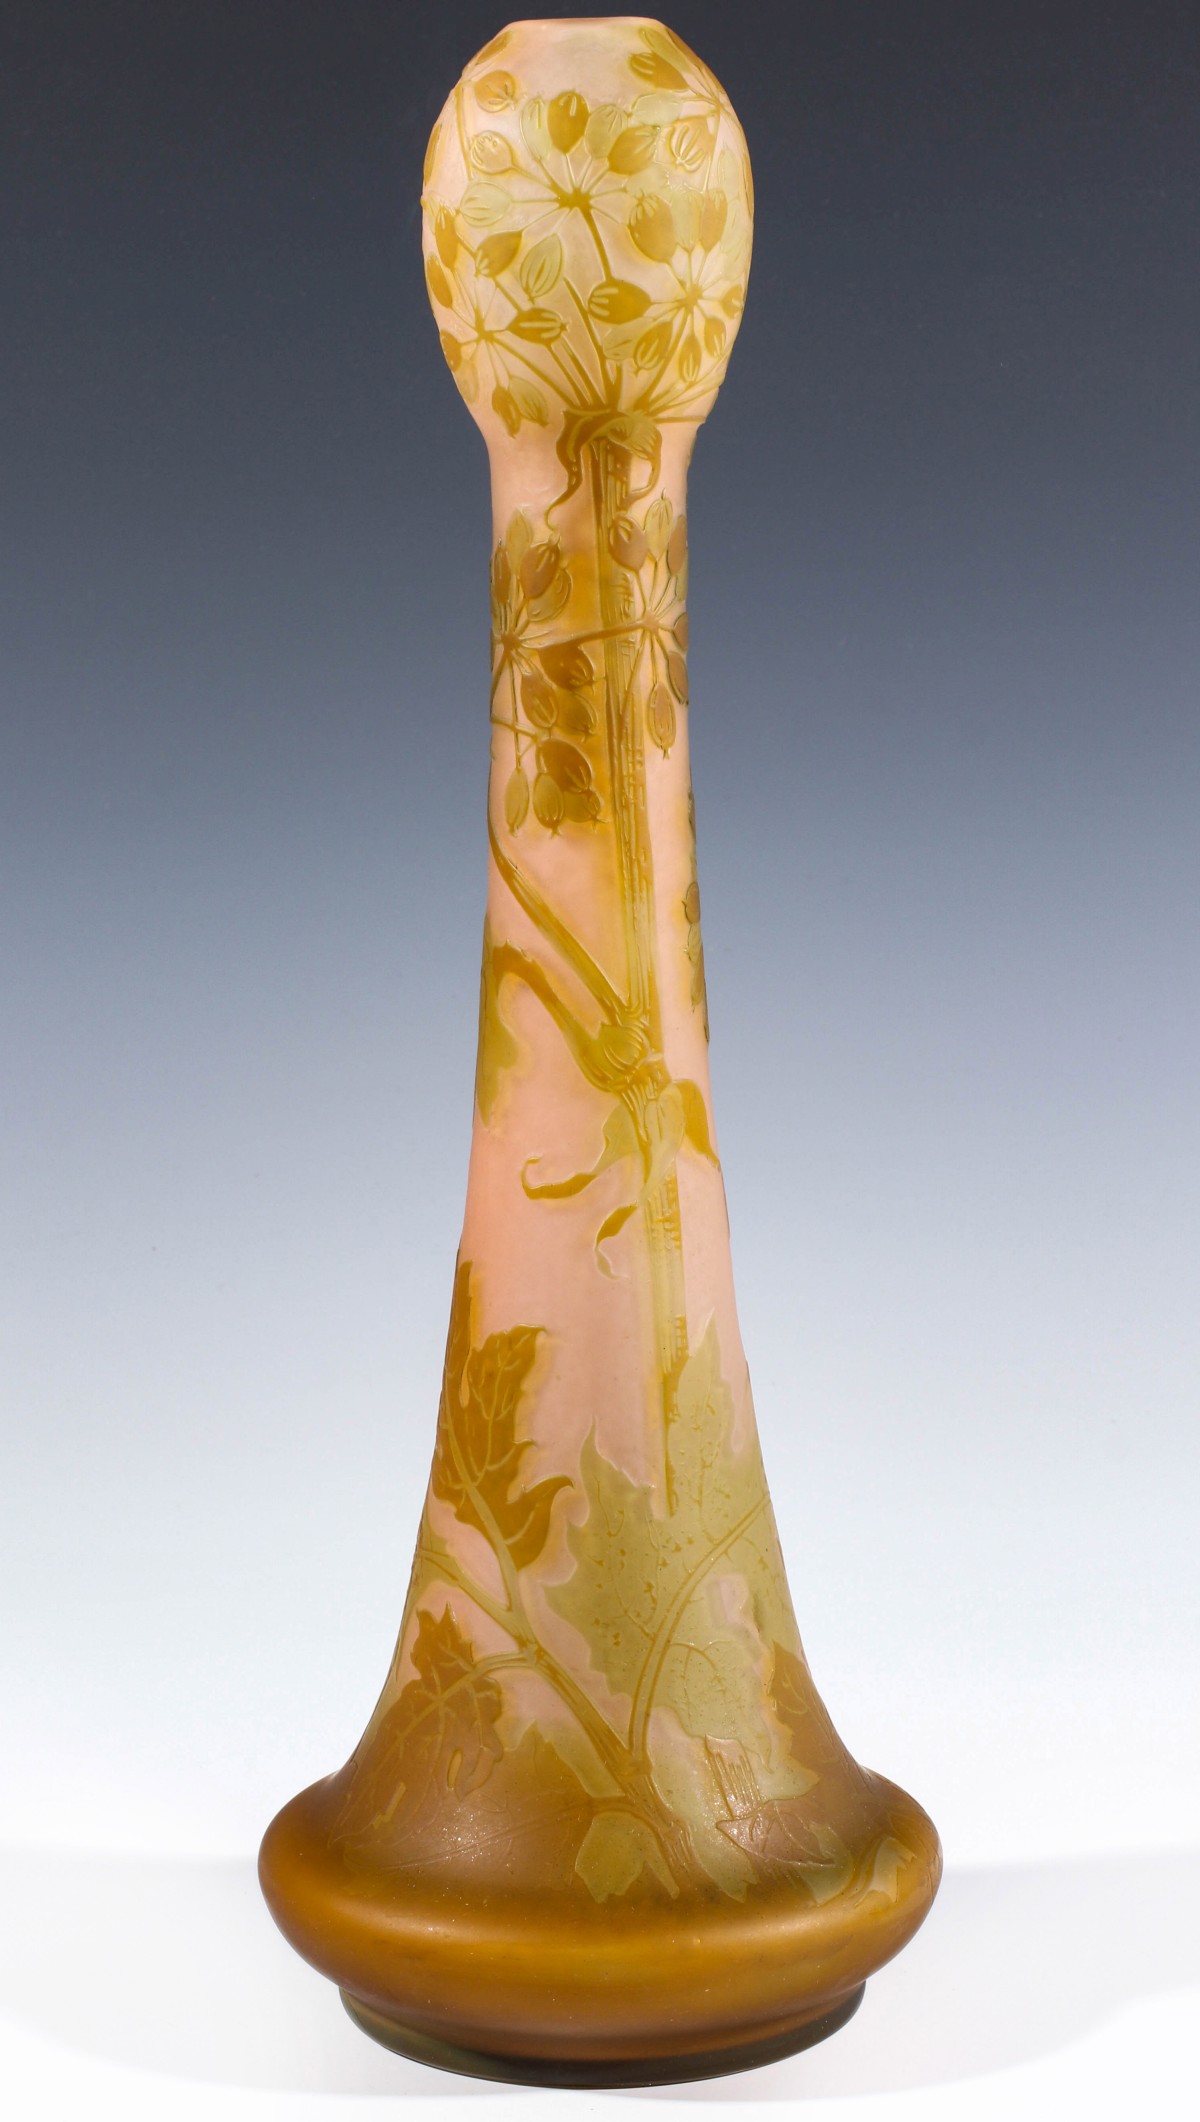 A FINE 17-INCH FRENCH CAMEO GLASS VASE SIGNED GALLÃ‰